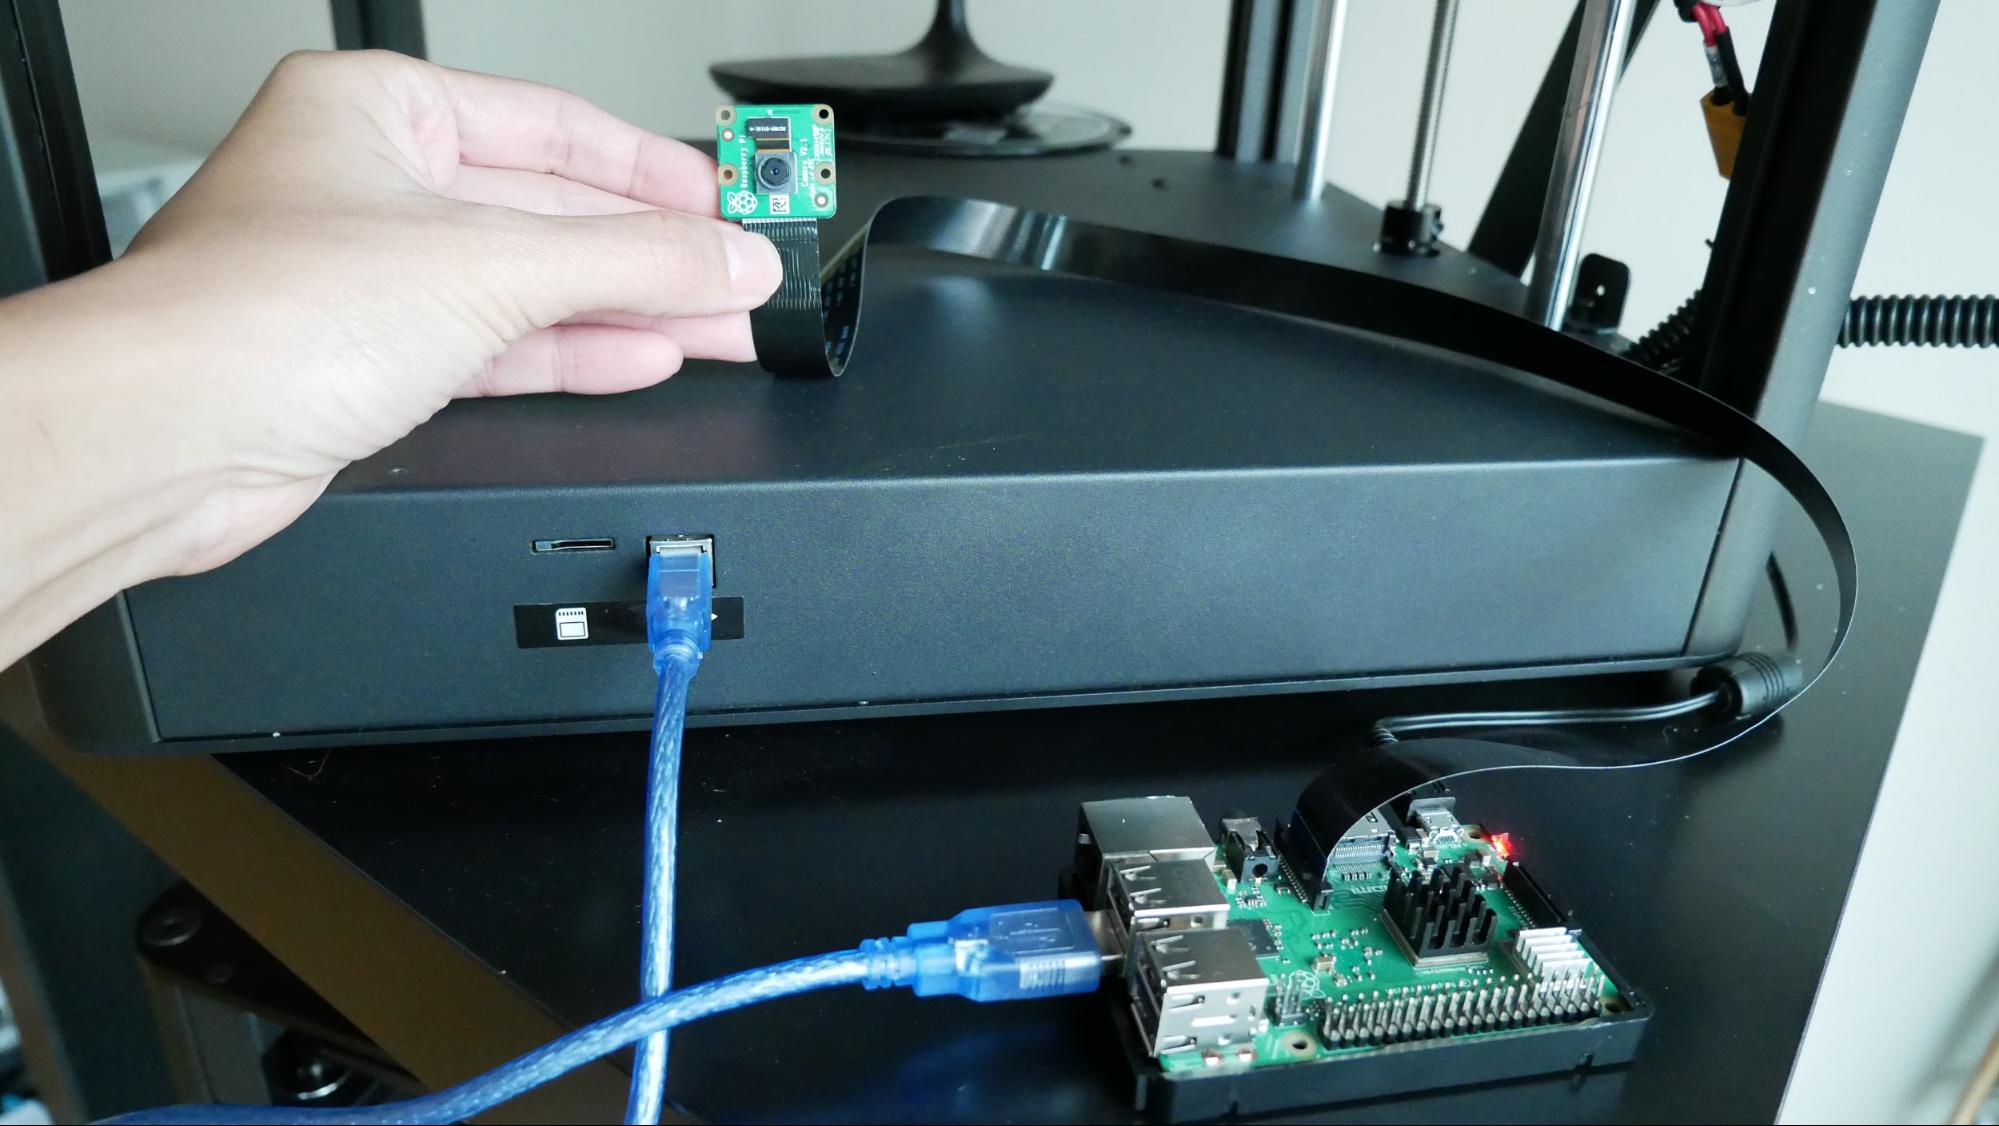 orkest focus stok How to Remote Monitor your 3D Printer with Raspberry Pi | Tom's Hardware